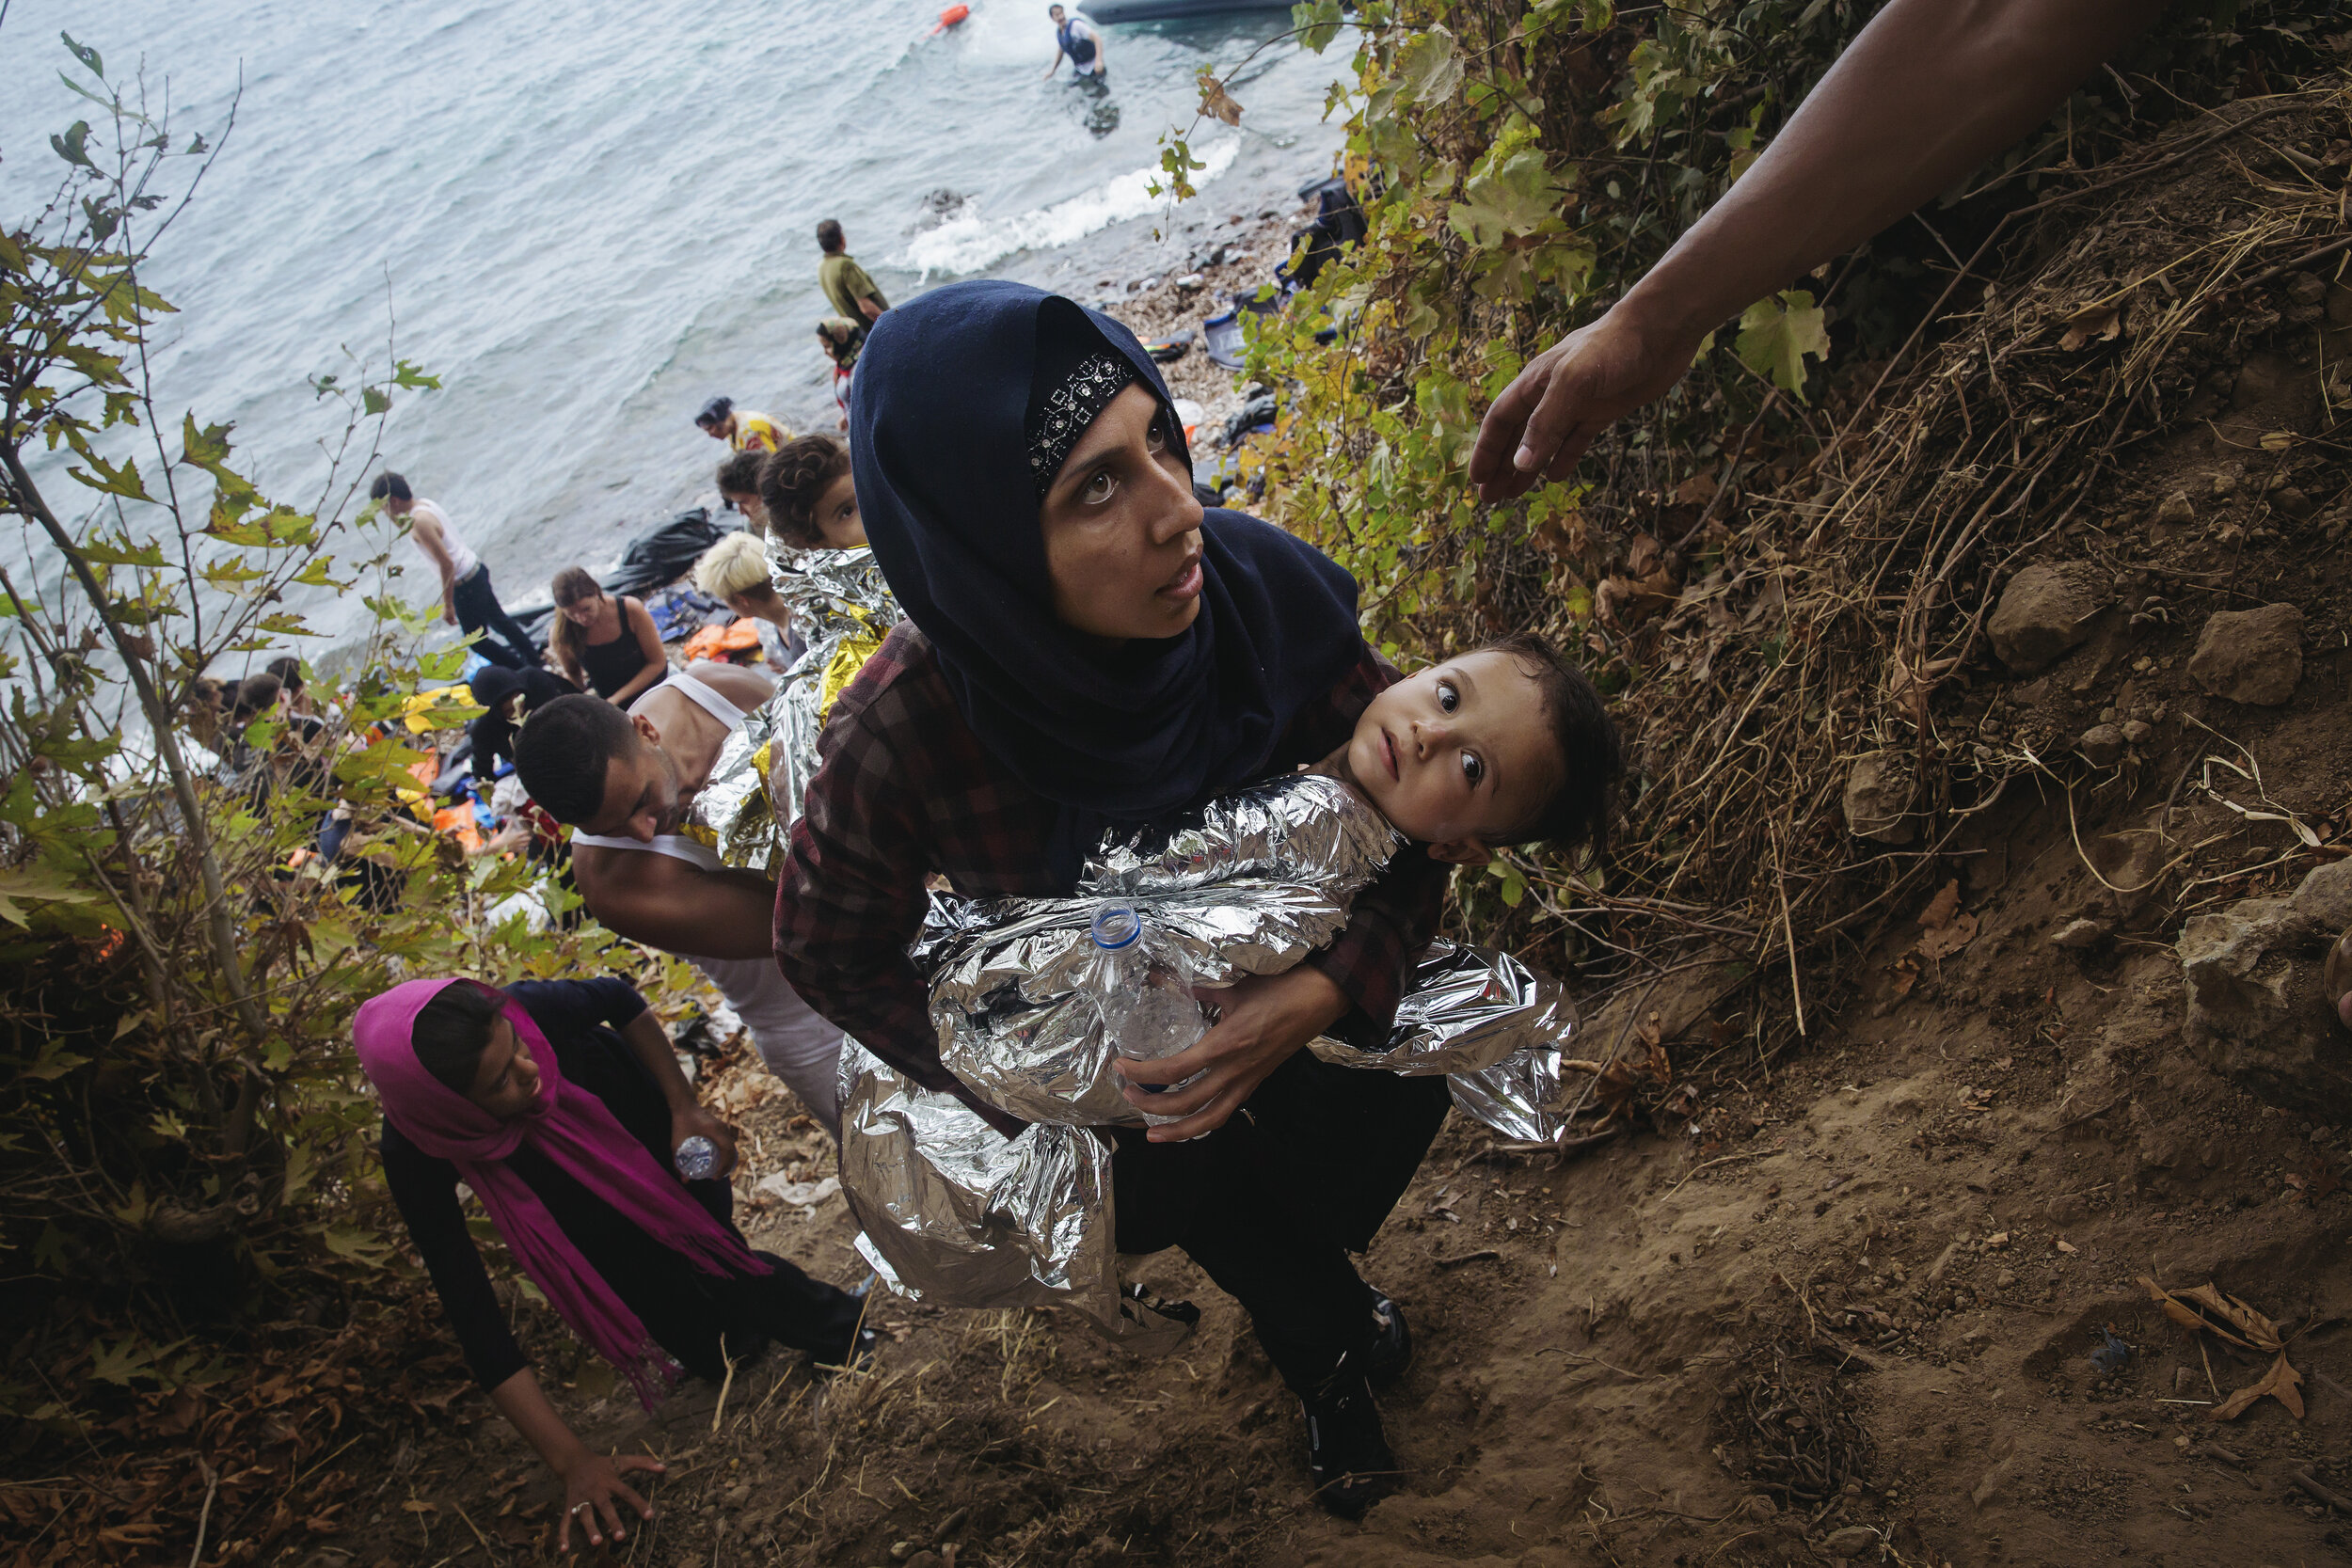   A woman climbs a hill with her baby after coming ashore from Turkey onto Lesvos, Greece during a mass exodus from Syria. 2015  